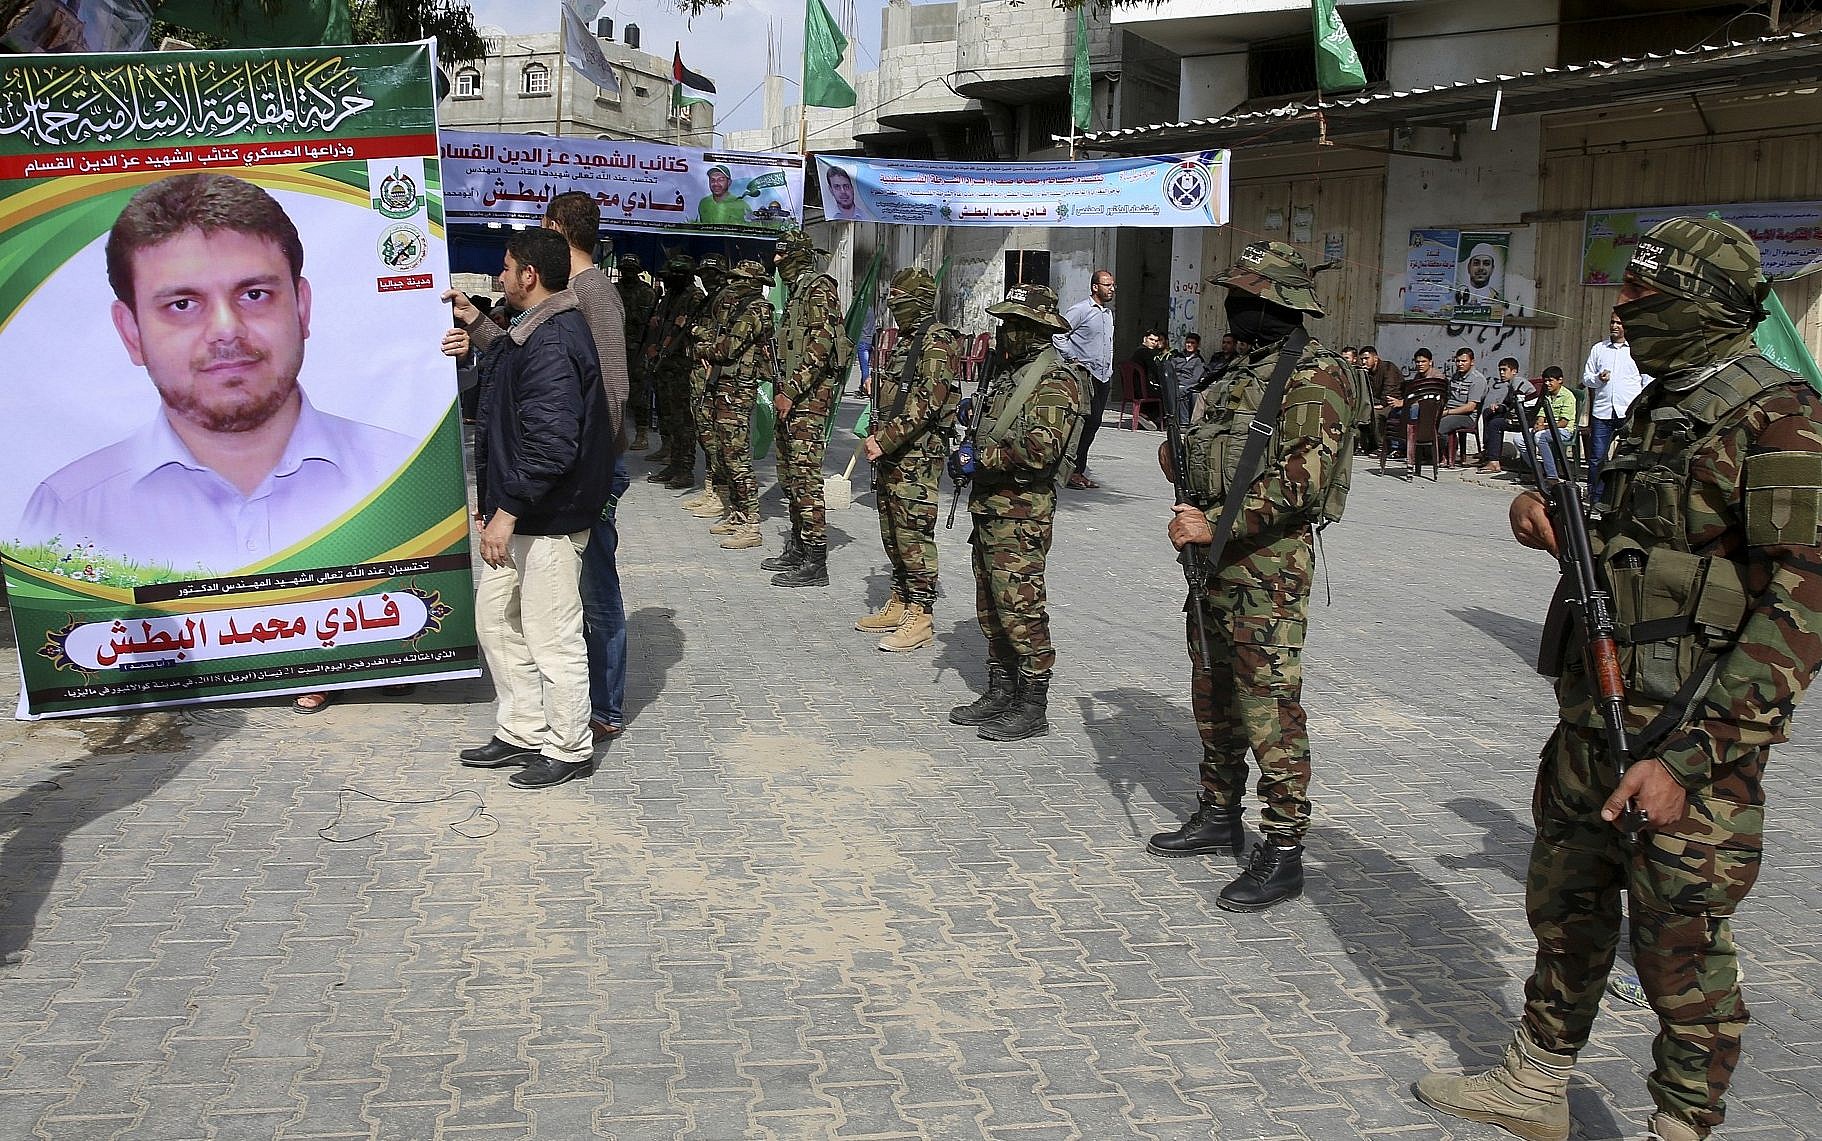 Members of the Qassam Brigades of Hamas in front of Fadi's home in Jabaliya, Palestine. Img from the Times of Israel.